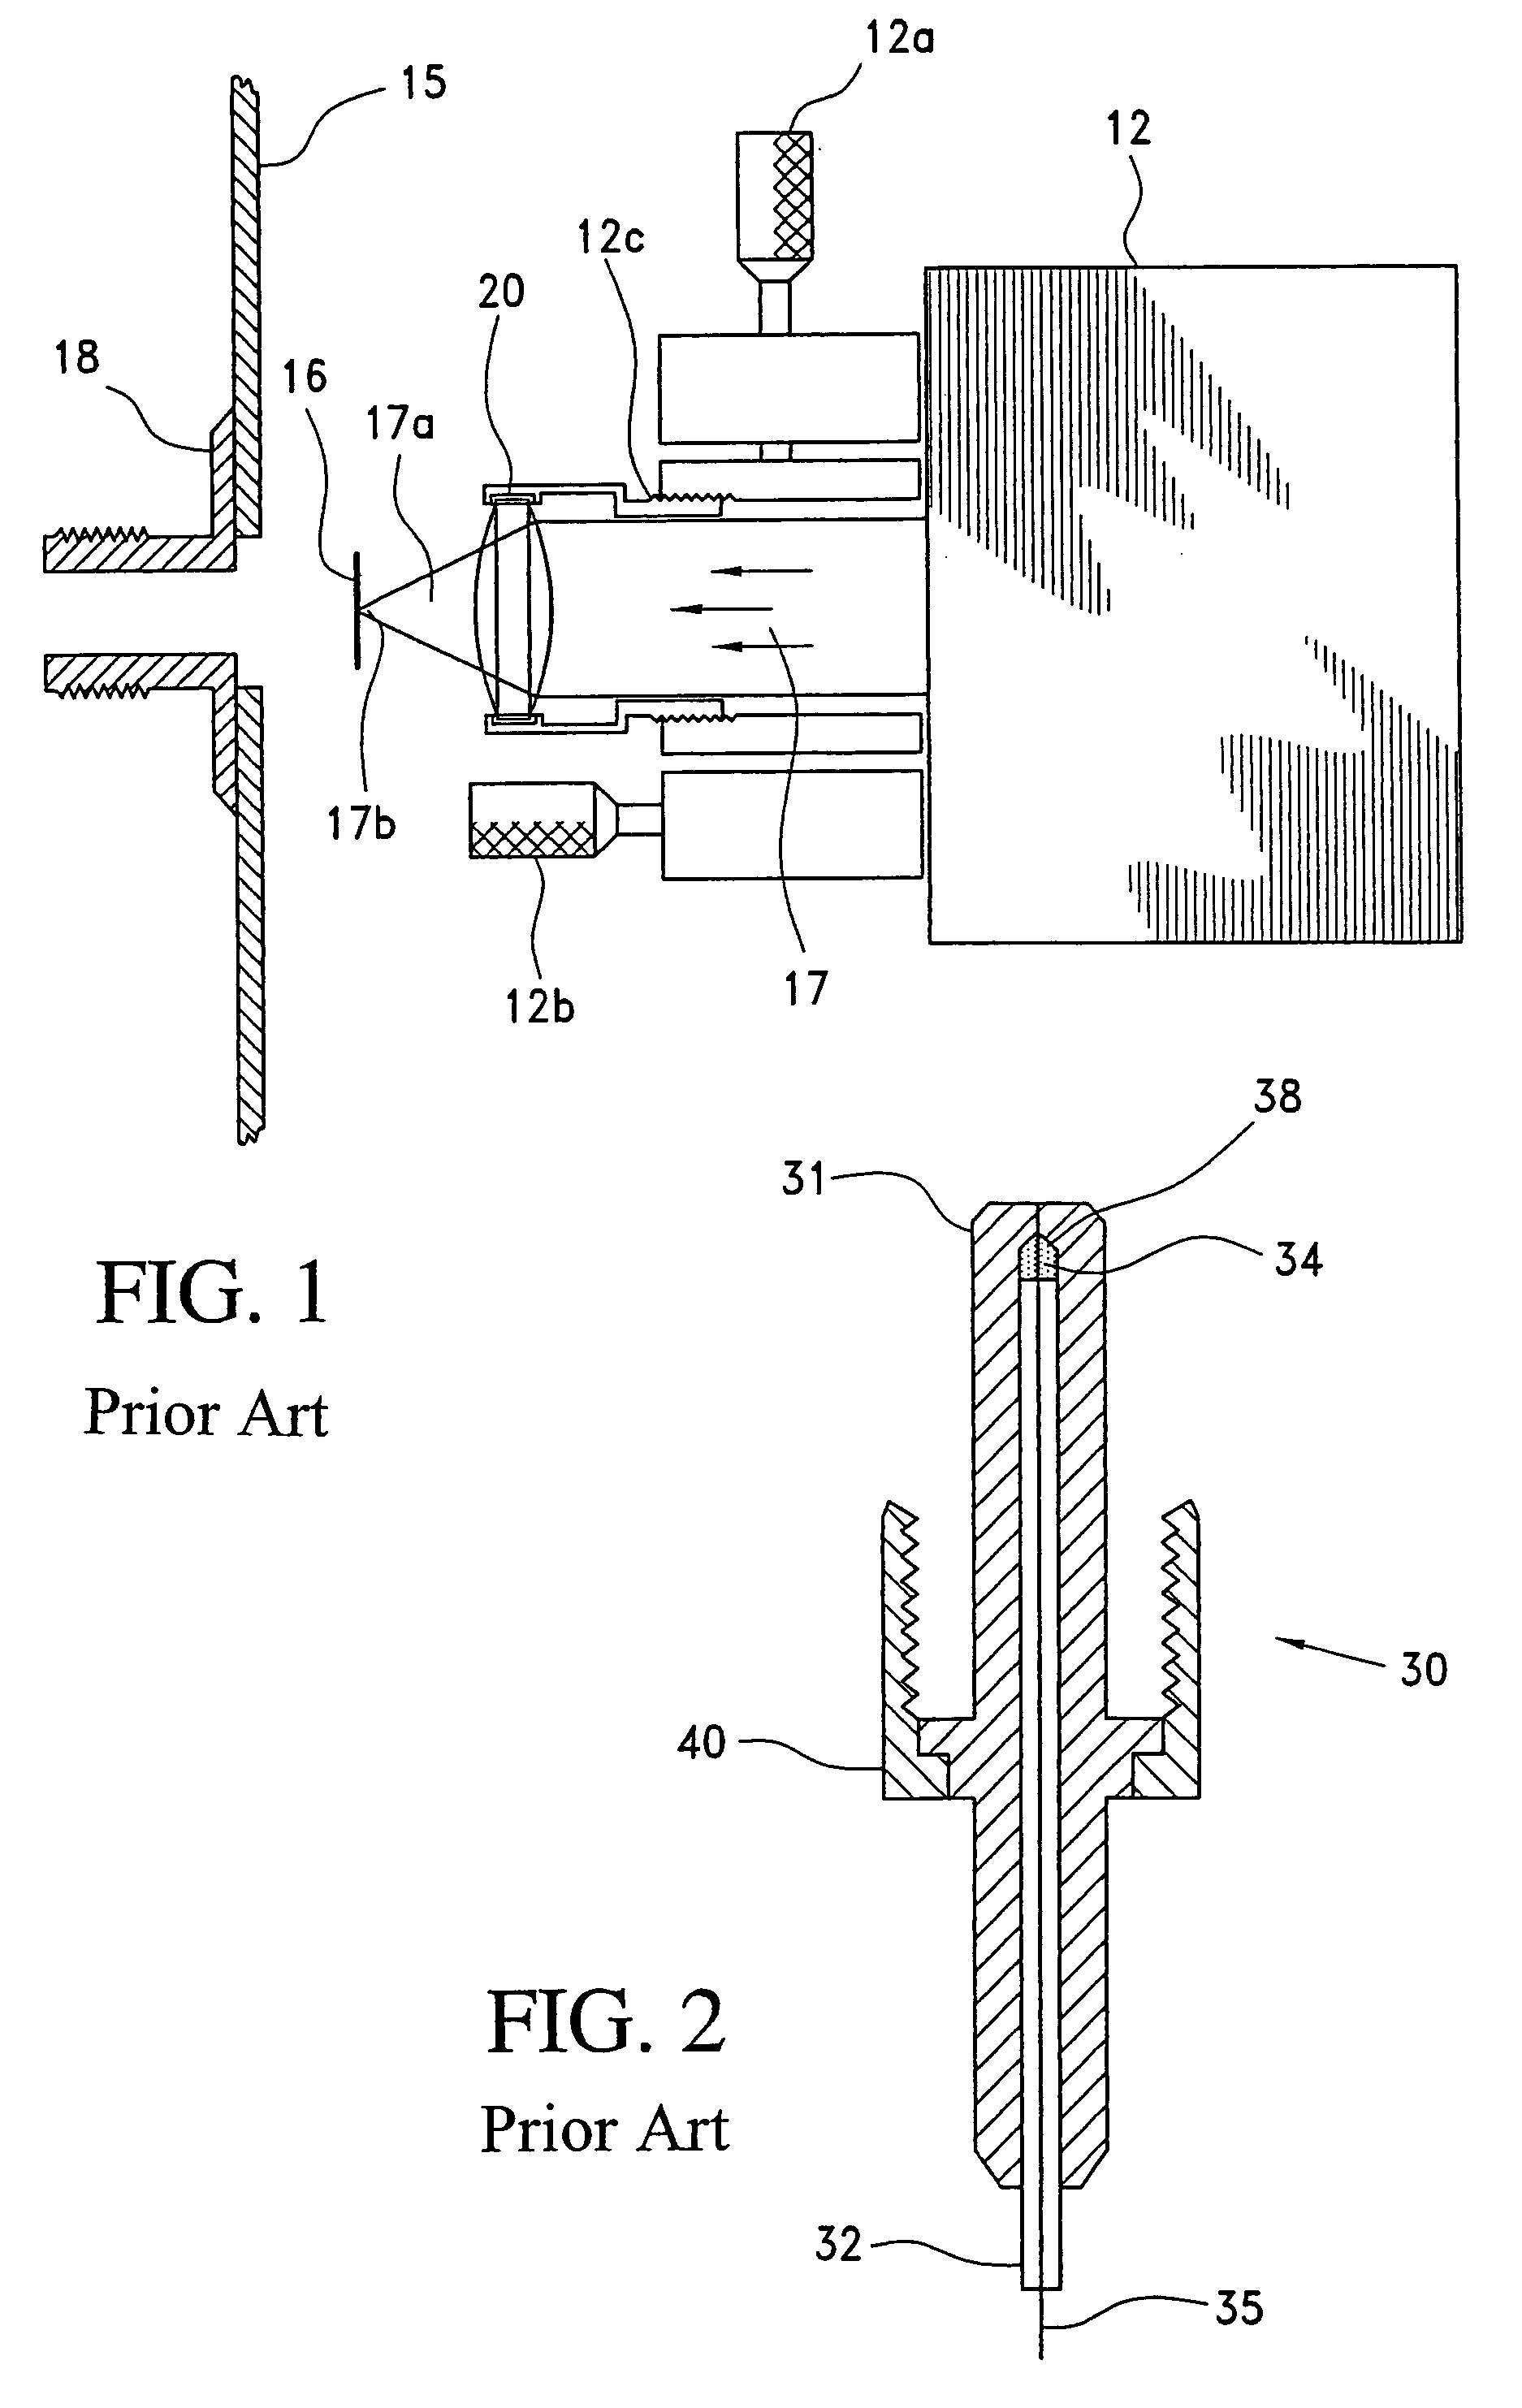 Apparatus and method for diffusing laser energy that fails to couple into small core fibers, and for reducing coupling to the cladding of the fiber